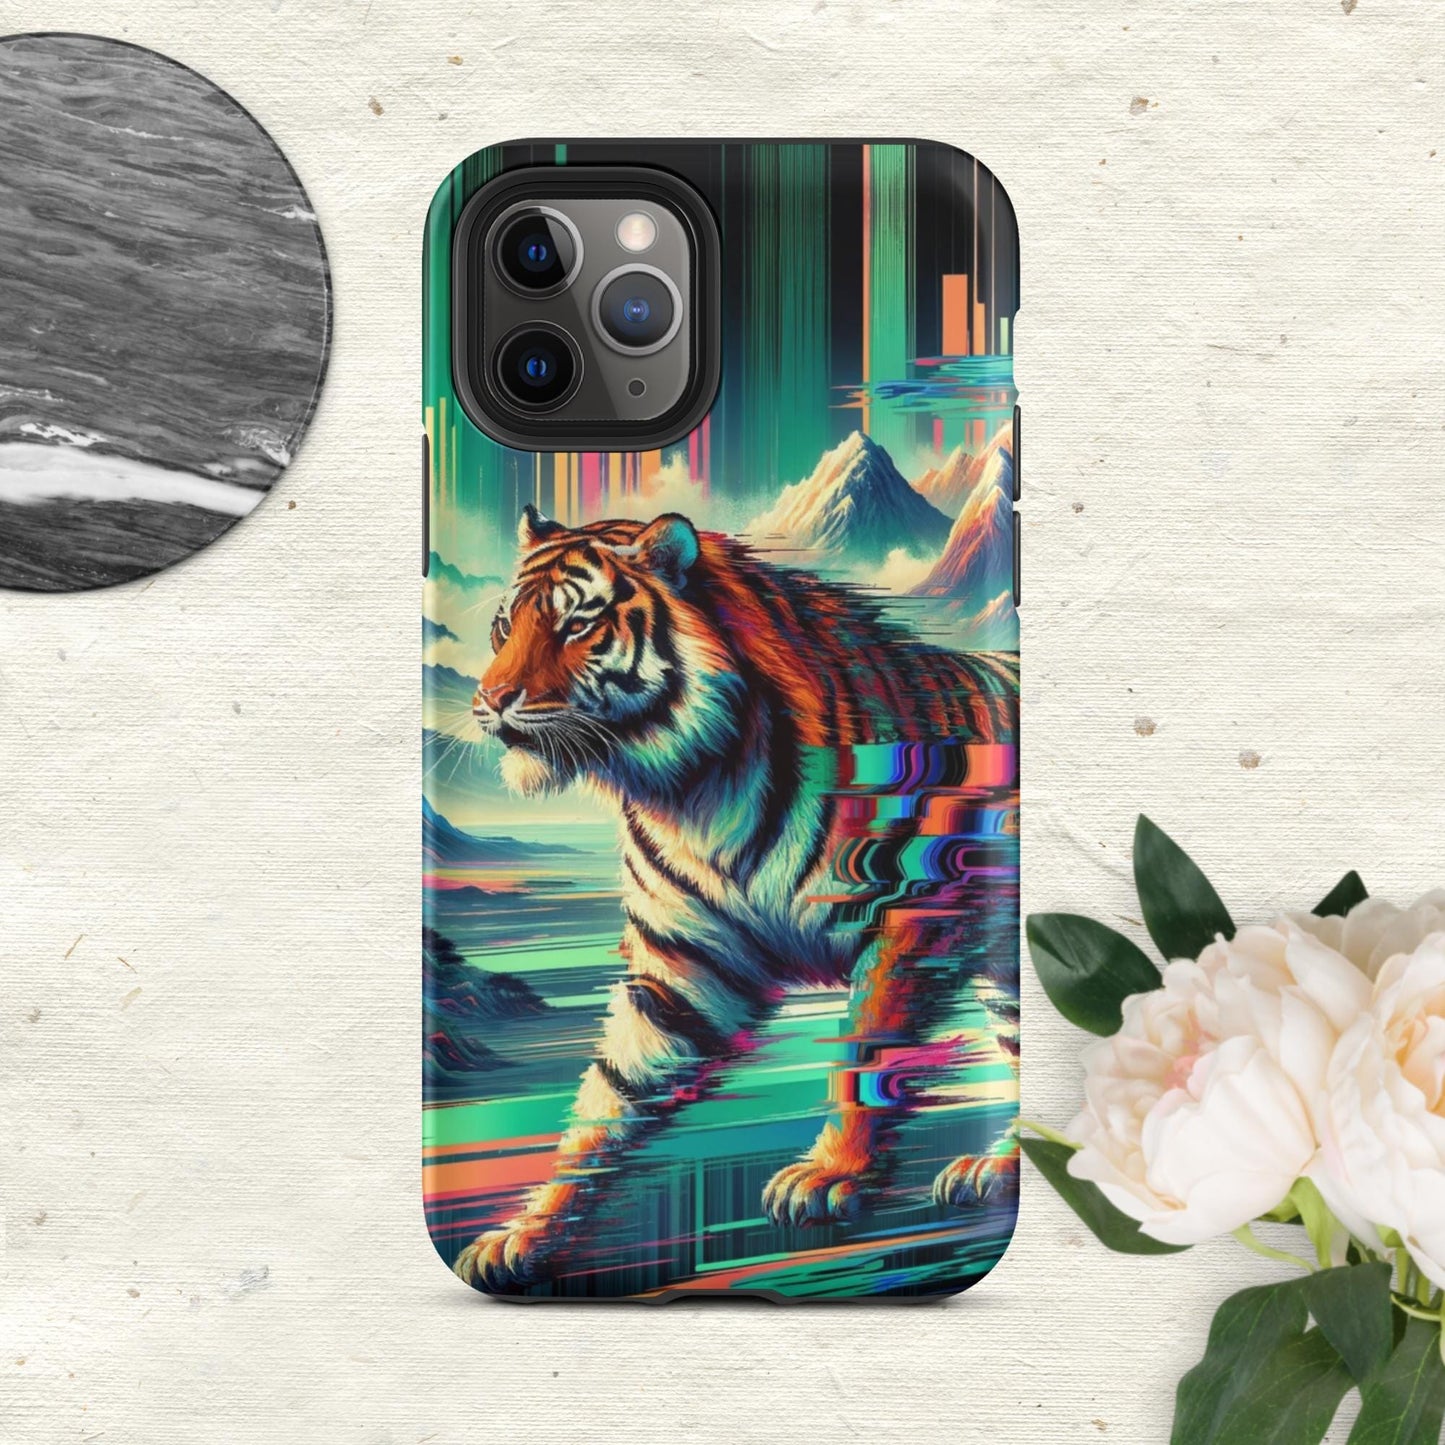 The Hologram Hook Up Matte / iPhone 11 Pro Tiger Glitch Tough Case for iPhone®